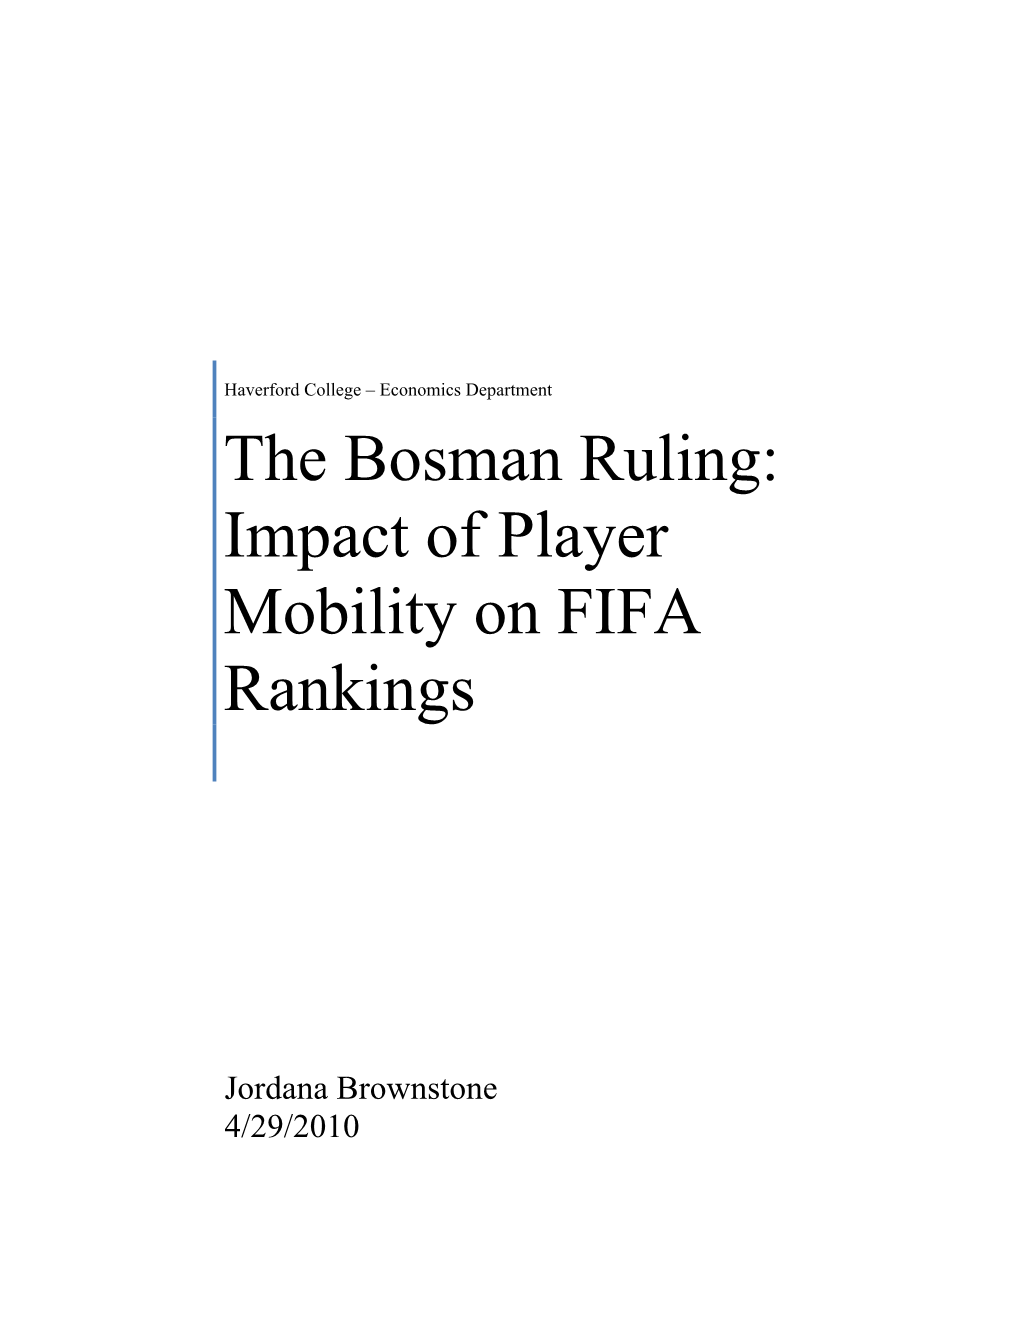 The Bosman Ruling: Impact of Player Mobility on FIFA Rankings